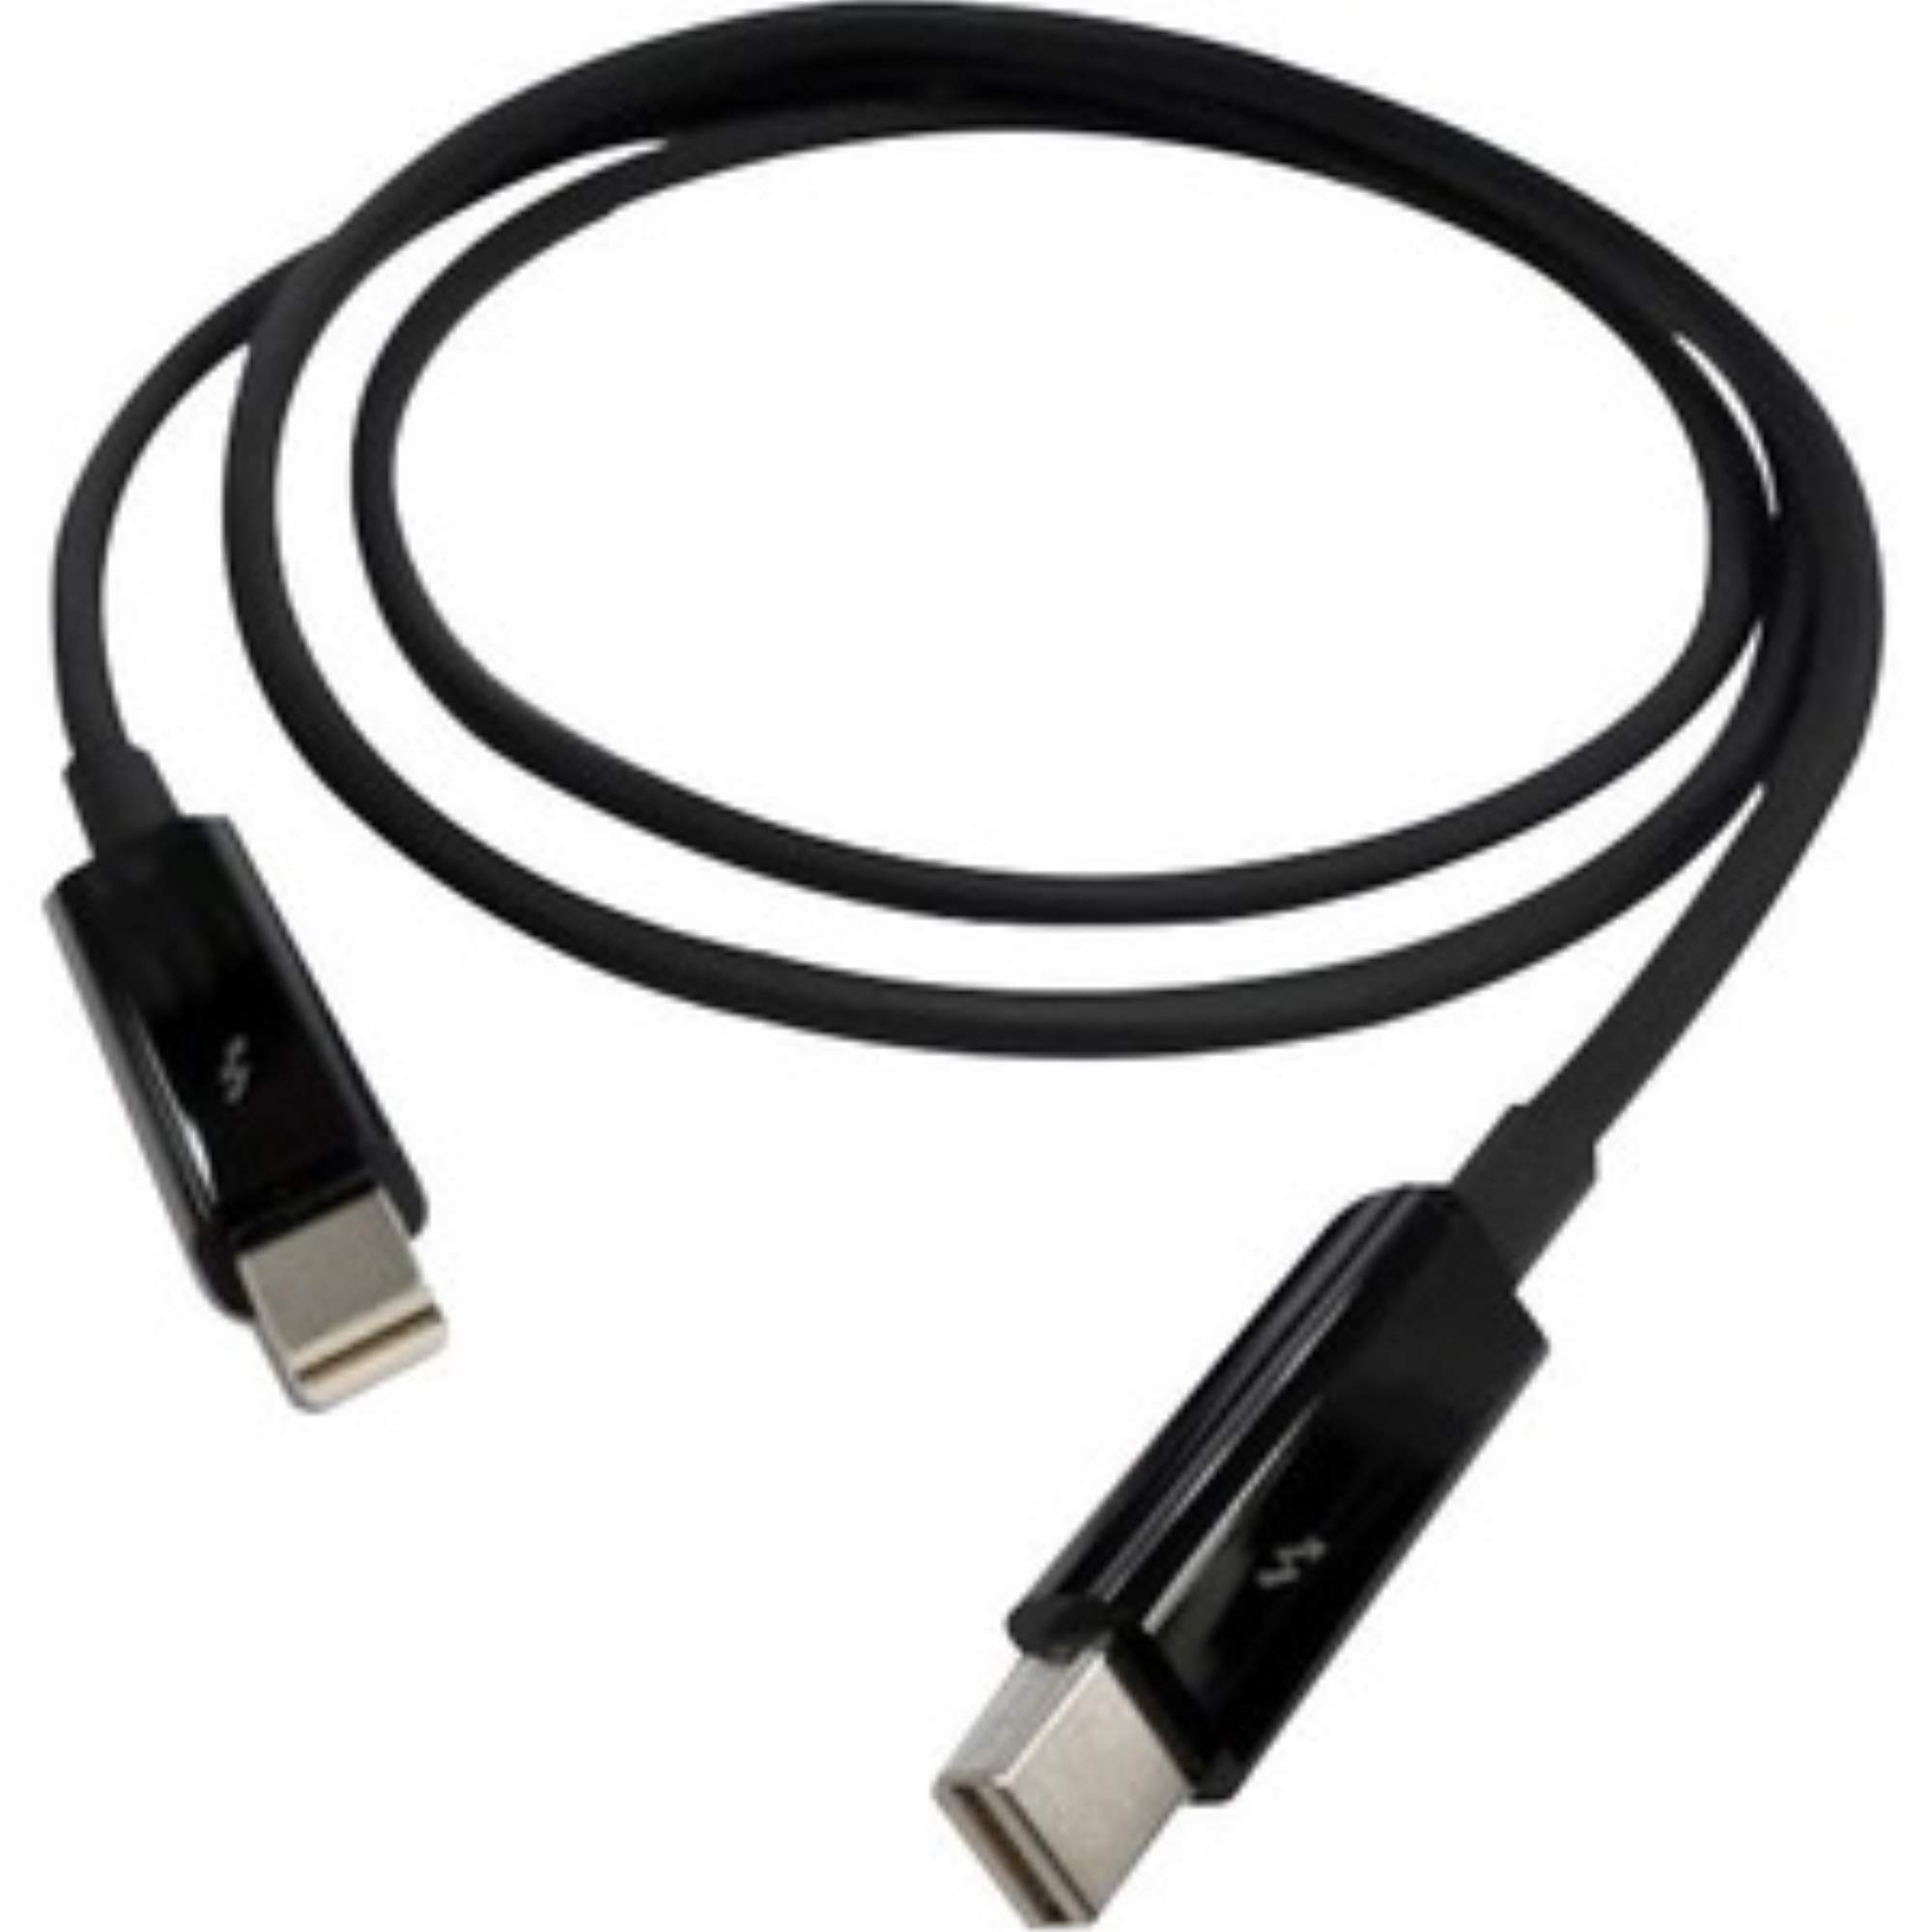 1.0M THUNDERBOLT 2 CABLE